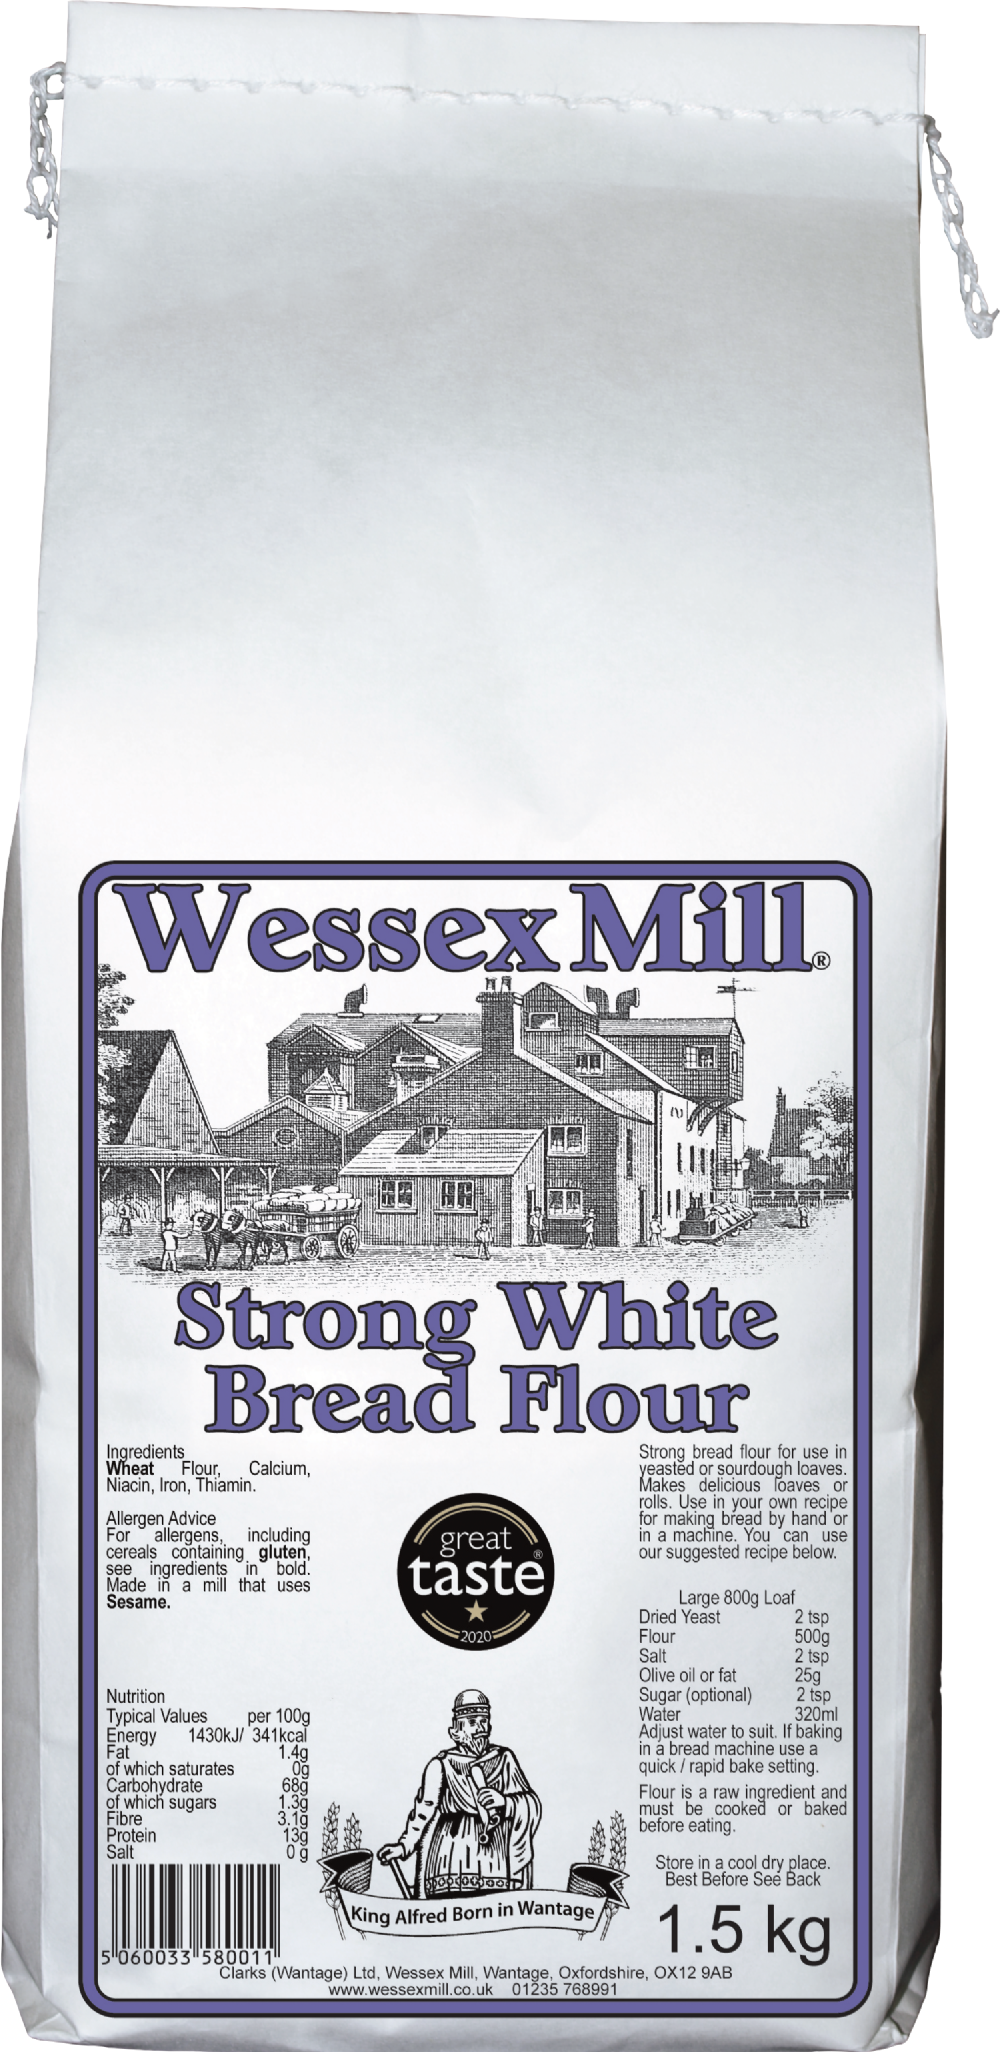 WESSEX MILL Strong White Bread Flour 1.5kg